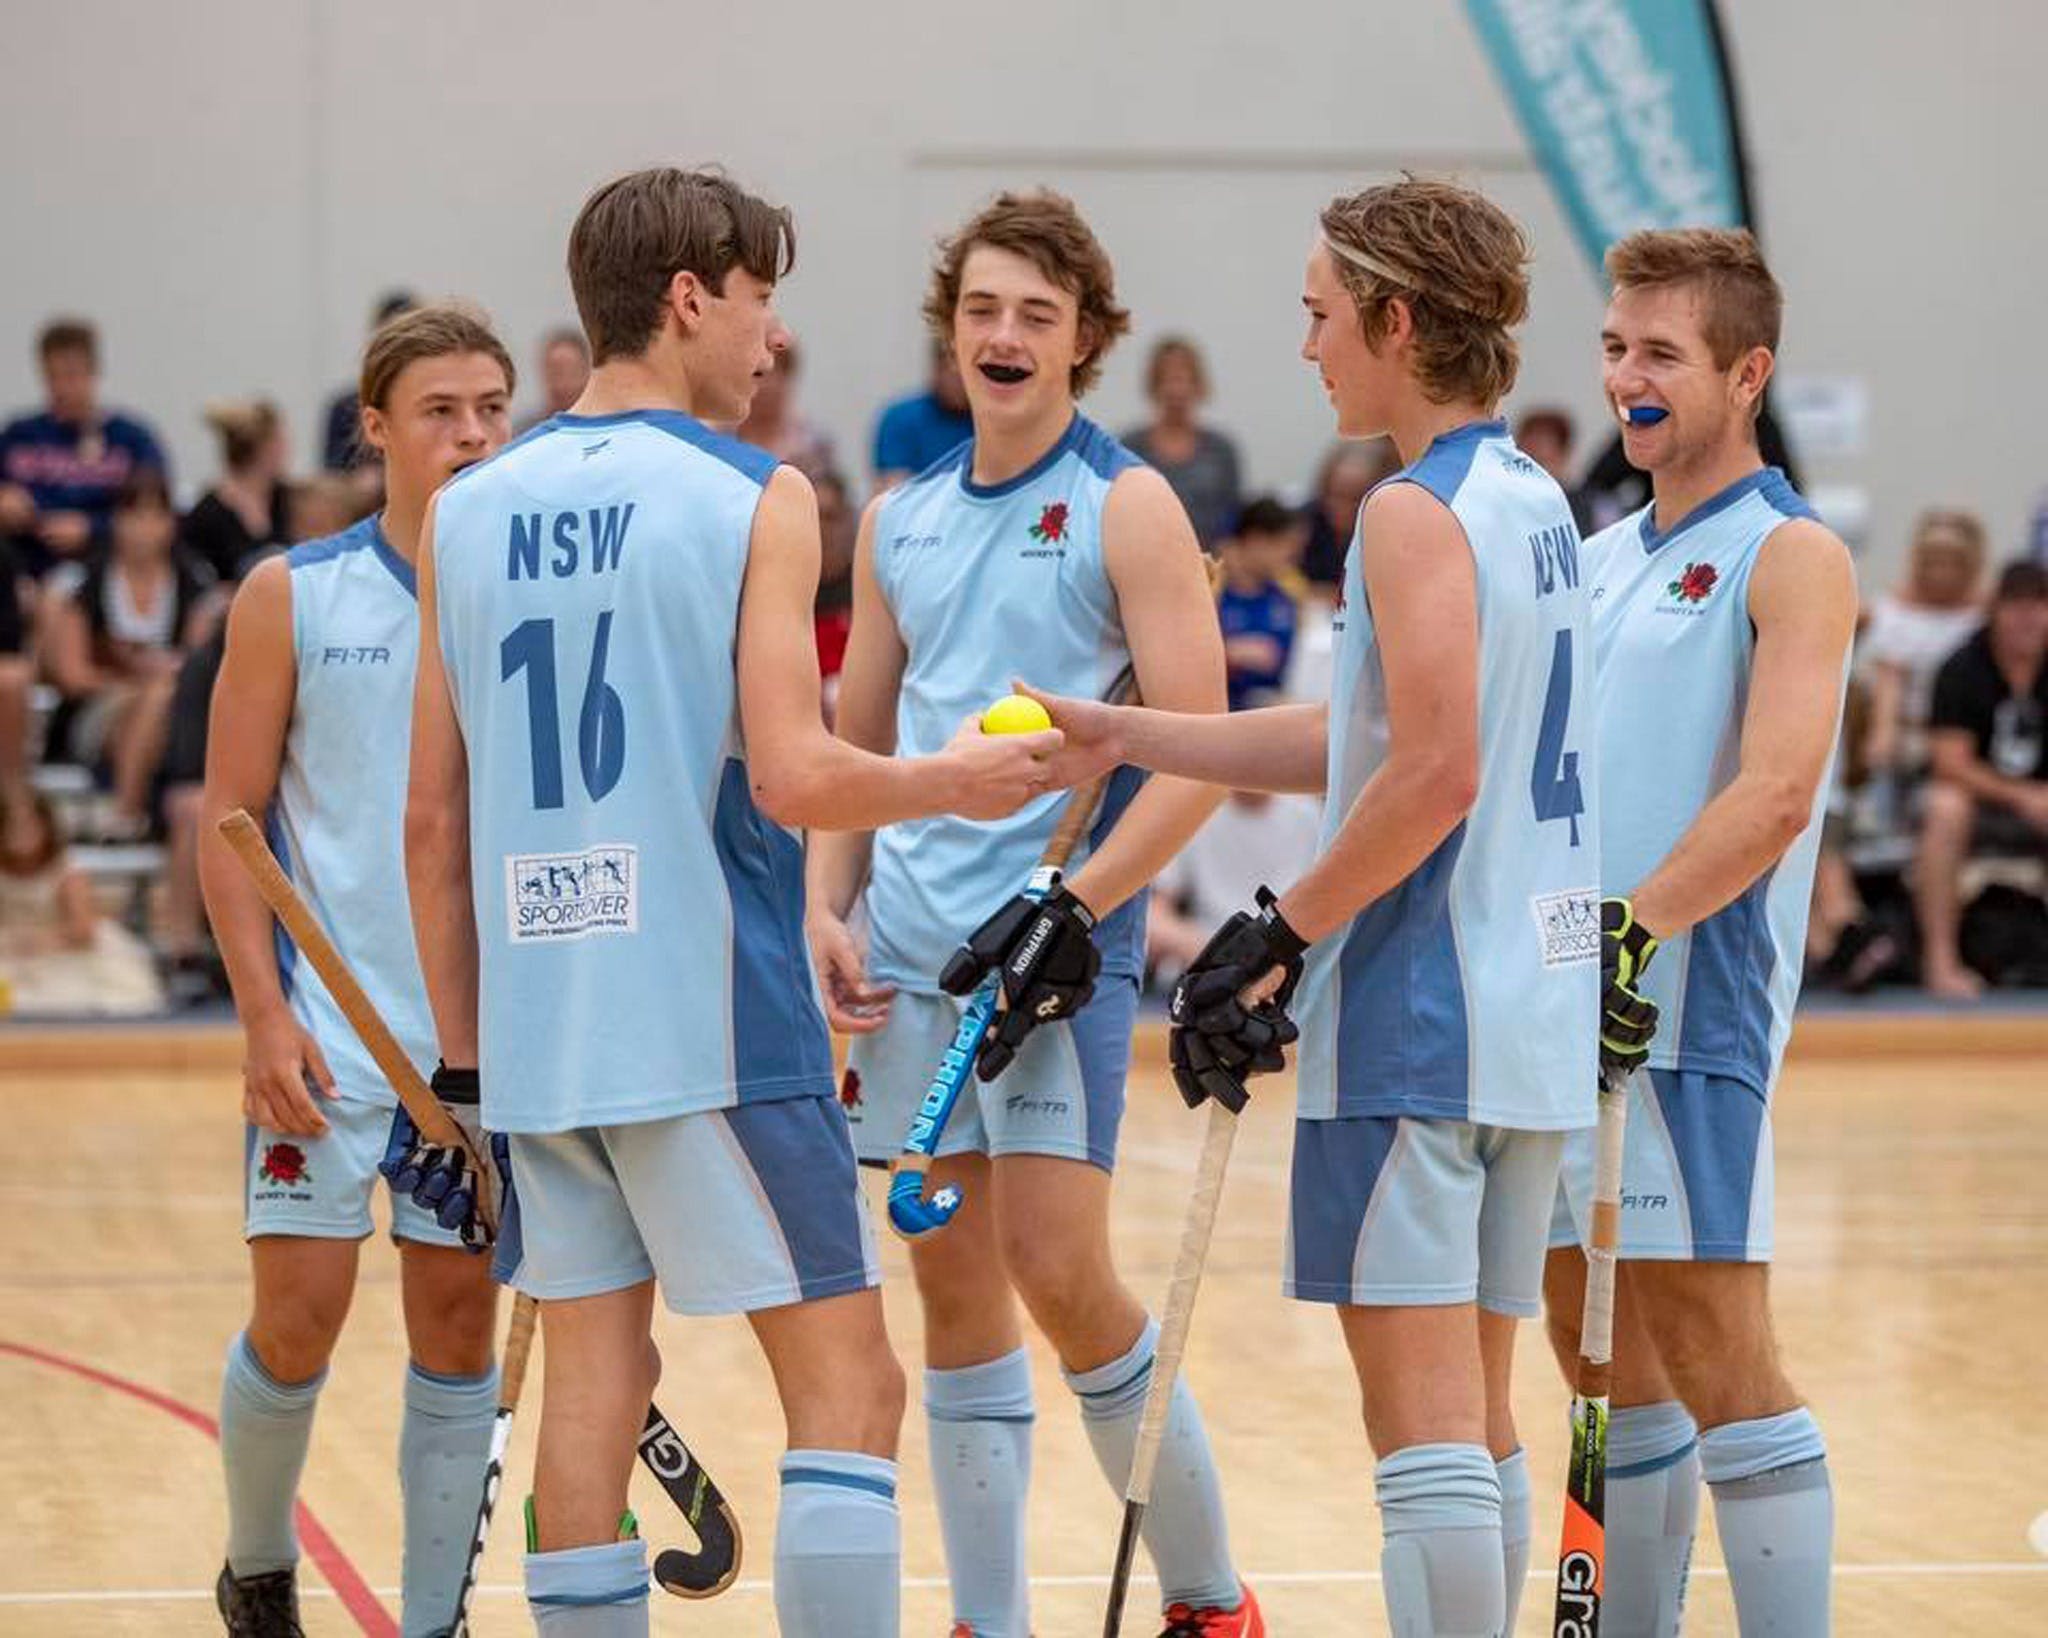 Hockey NSW Indoor State Championship  Open Men - Tourism Canberra